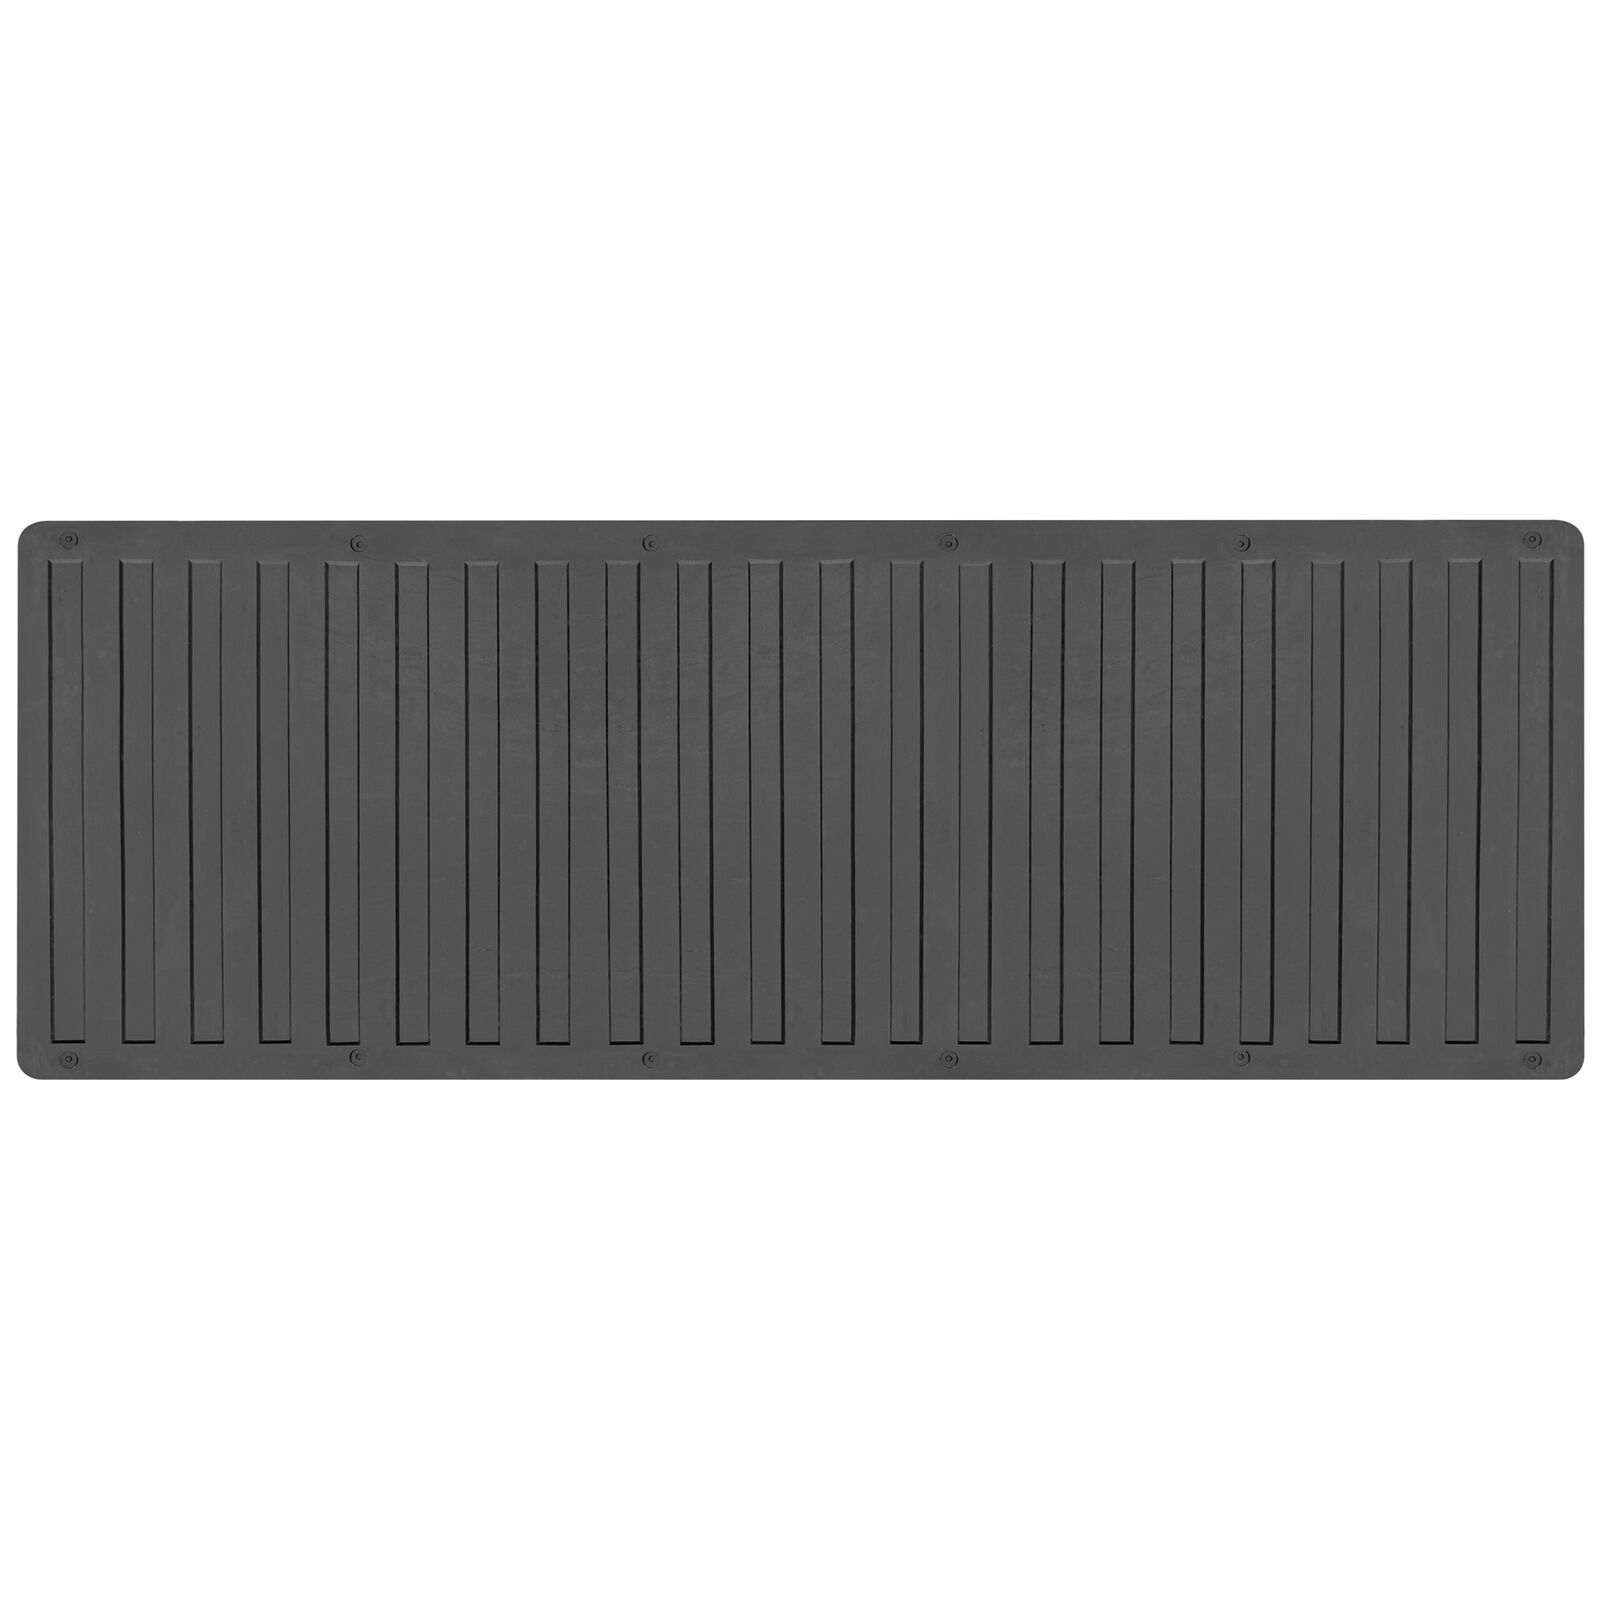 Pickup Truck Bed Tailgate Mat Cargo Liner - Thick Durable Rubber for Heavy Use